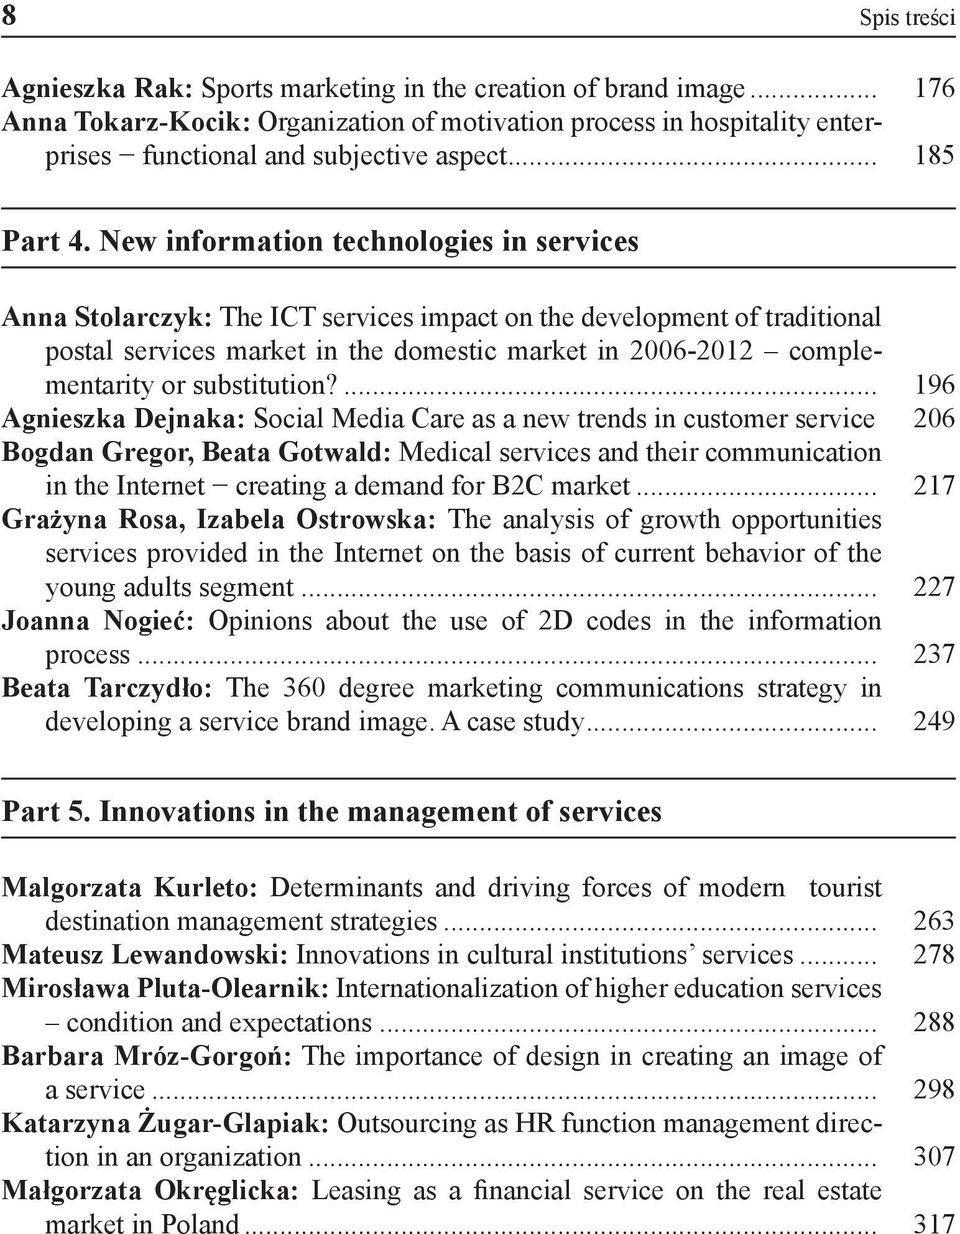 New information technologies in services Anna Stolarczyk: The ICT services impact on the development of traditional postal services market in the domestic market in 2006-2012 complementarity or